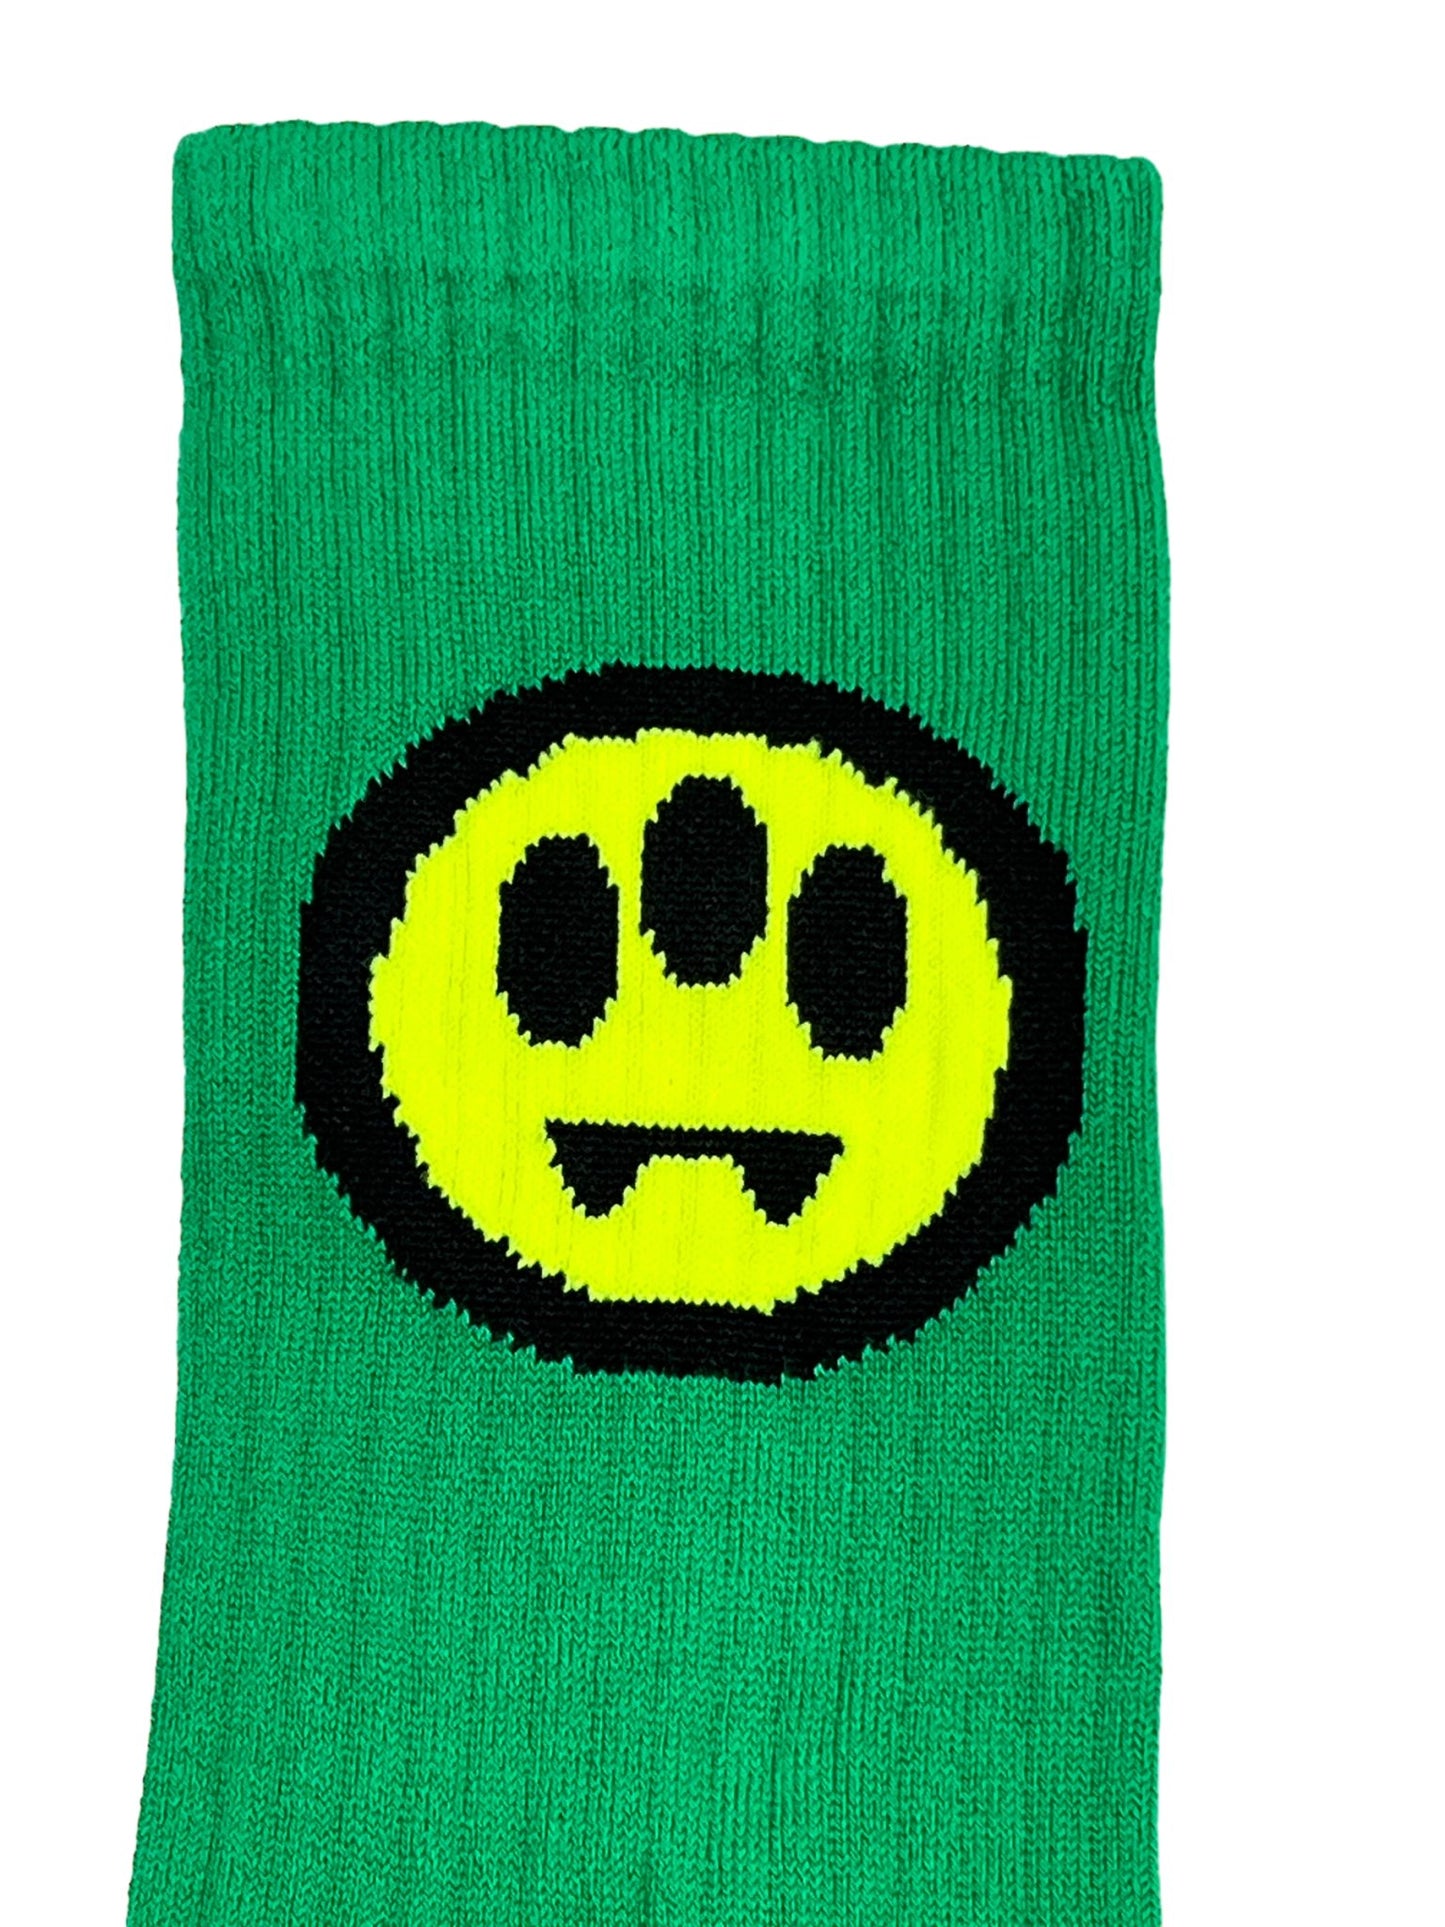 A BARROW S4BWUASO140 sock featuring a yellow and black smiley face graphic design, Made In Italy.